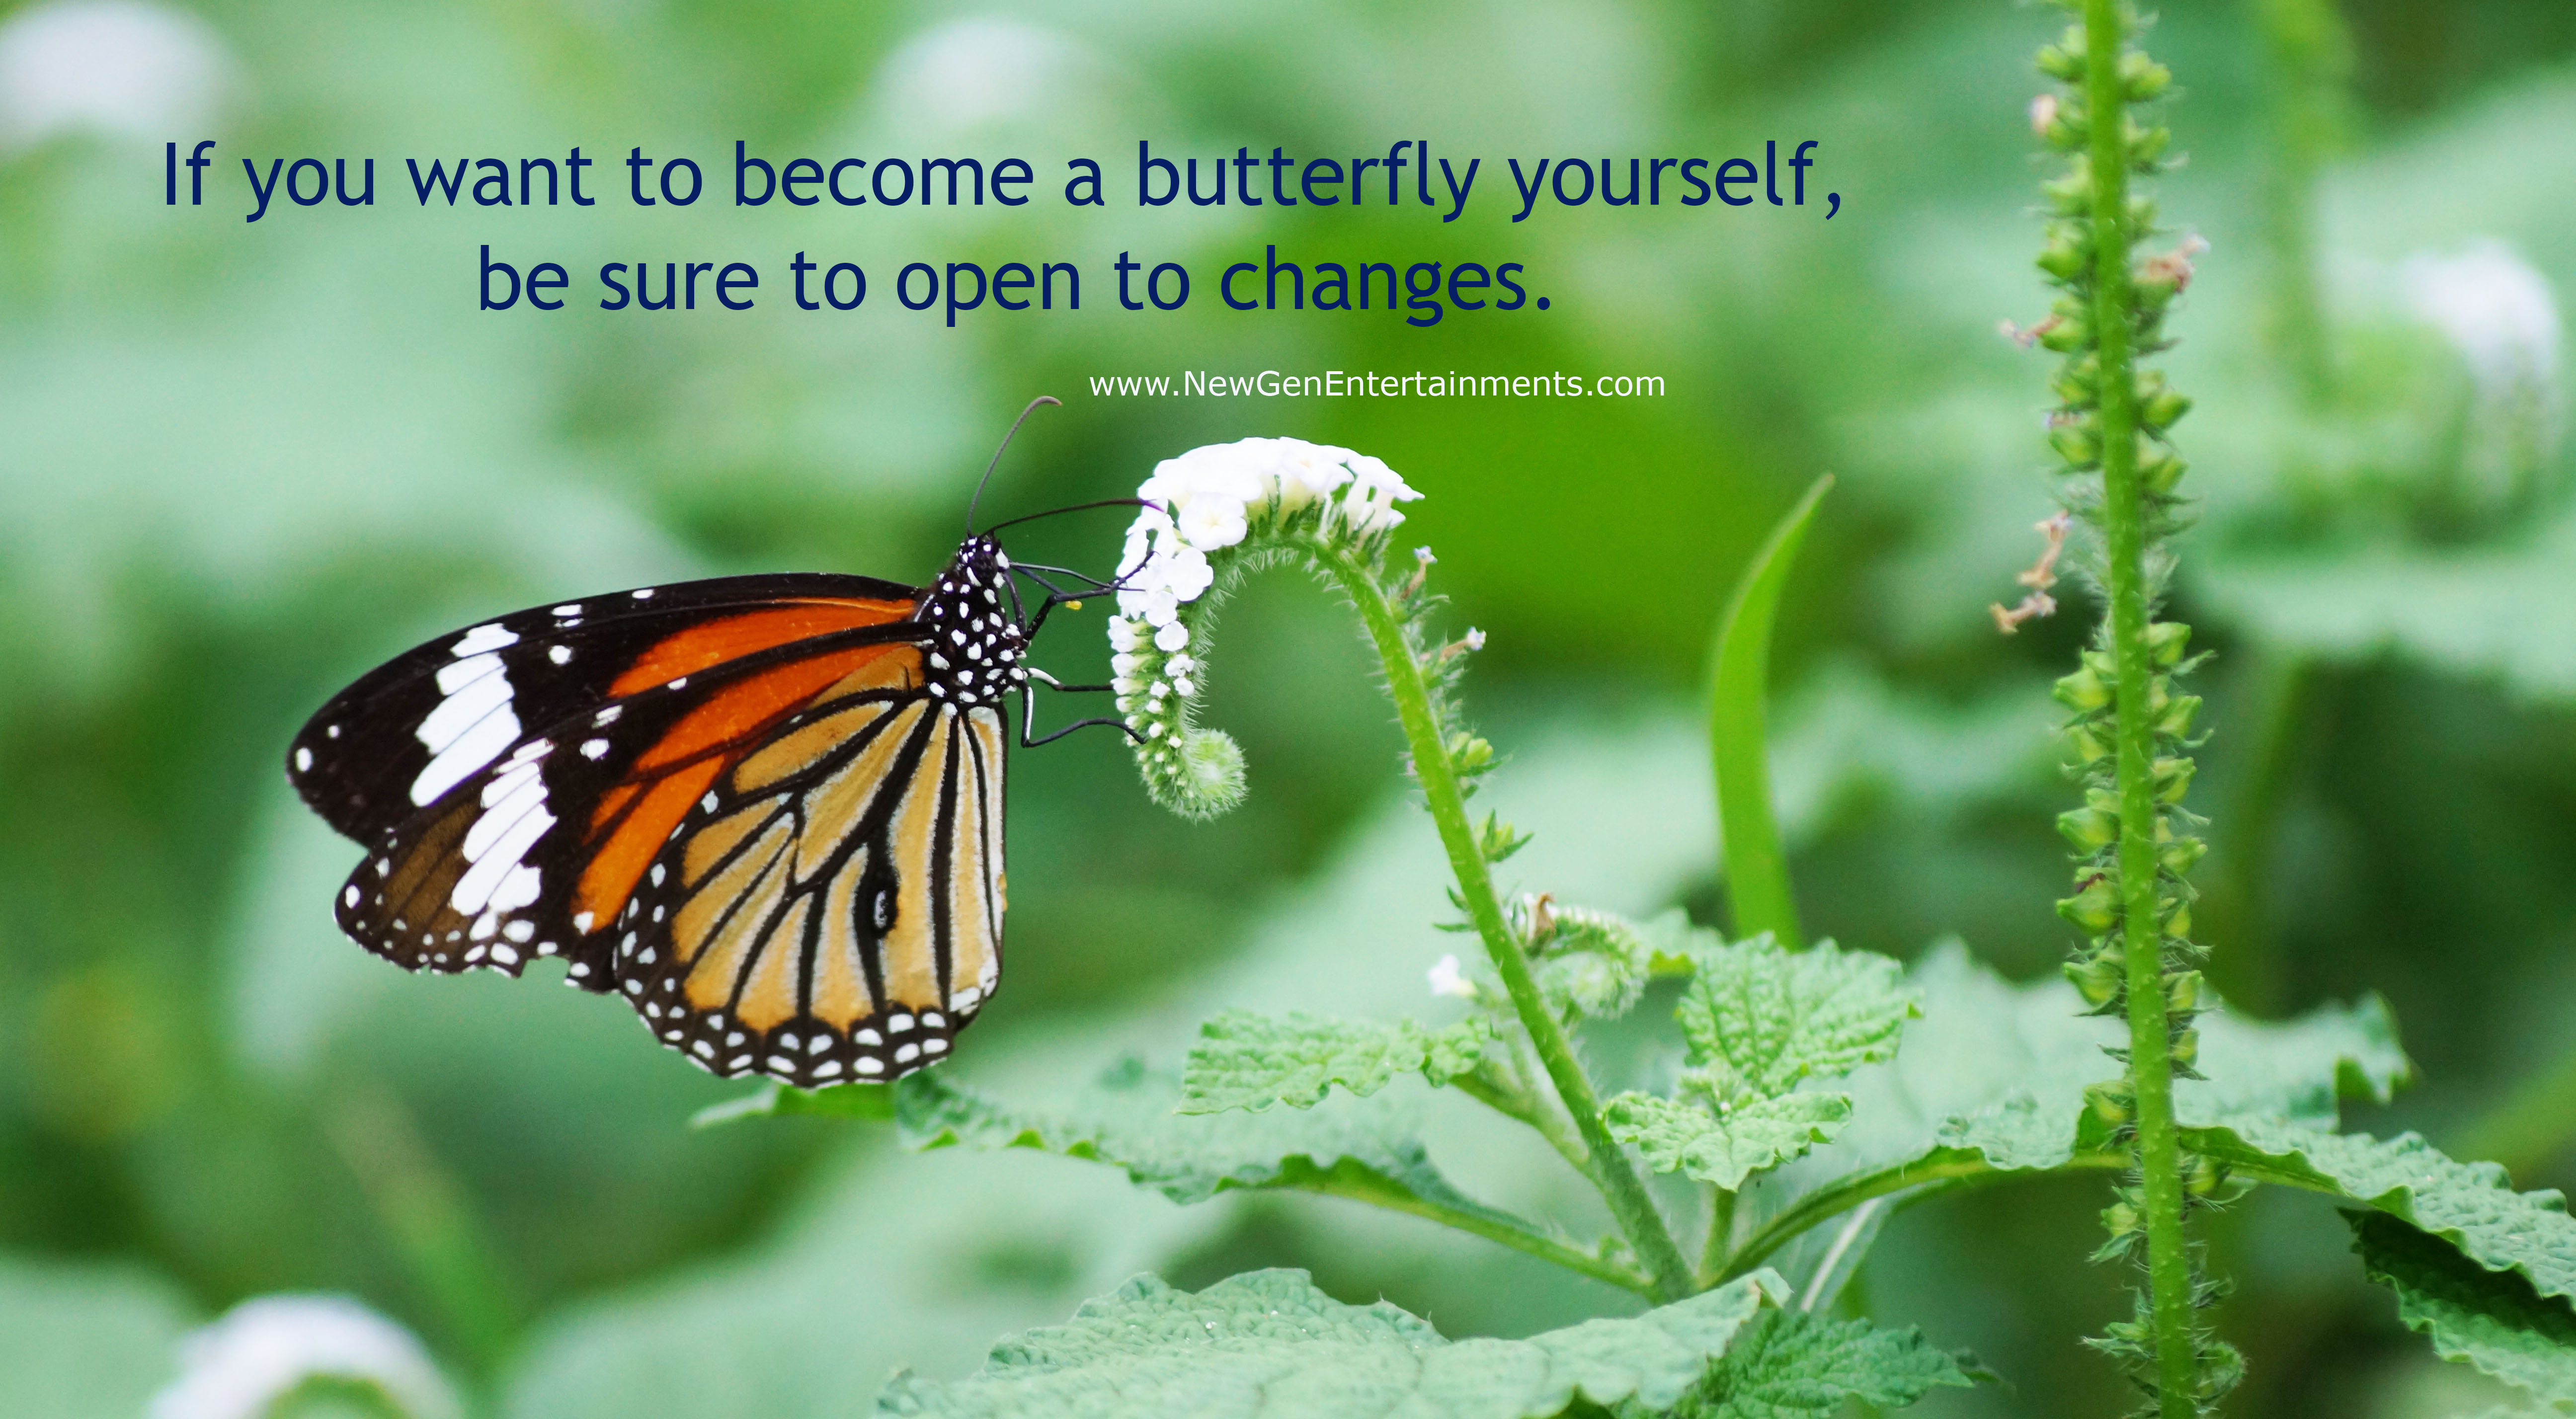 If you want to become a butterfly yourself, be sure to open to changes